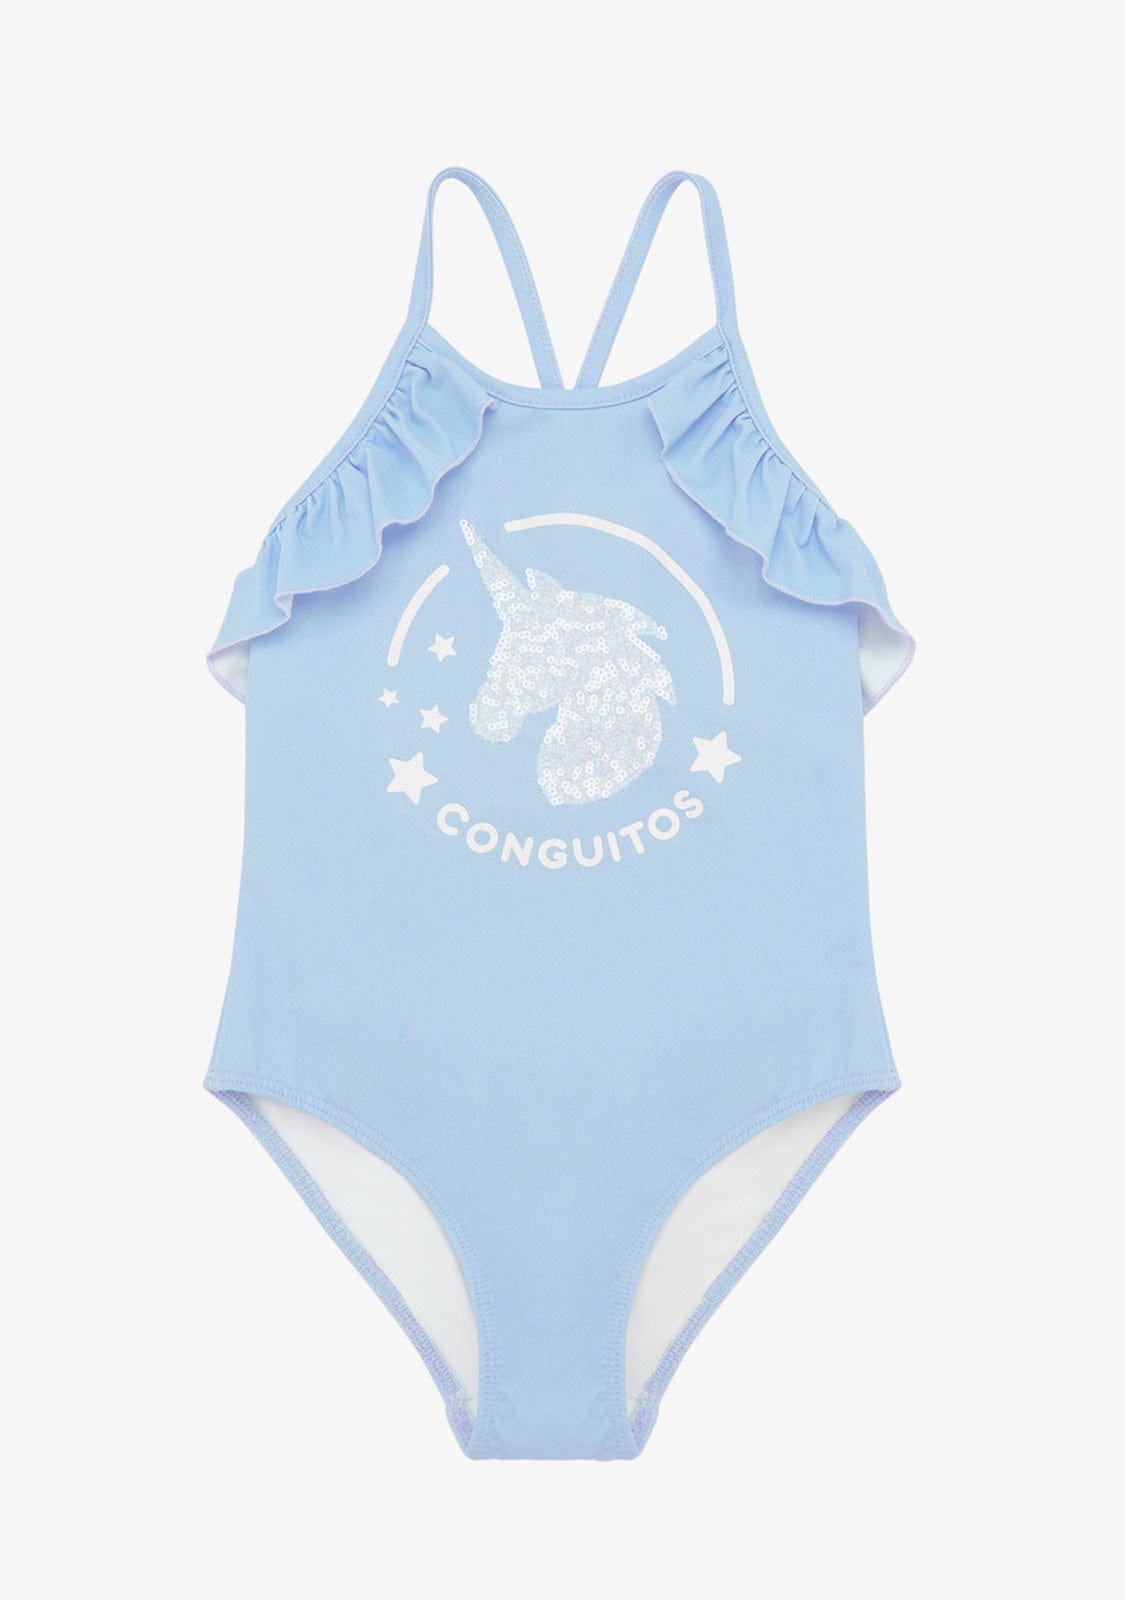 CONGUITOS TEXTIL Clothing Girl's Bluish Ruffled Swimsuit